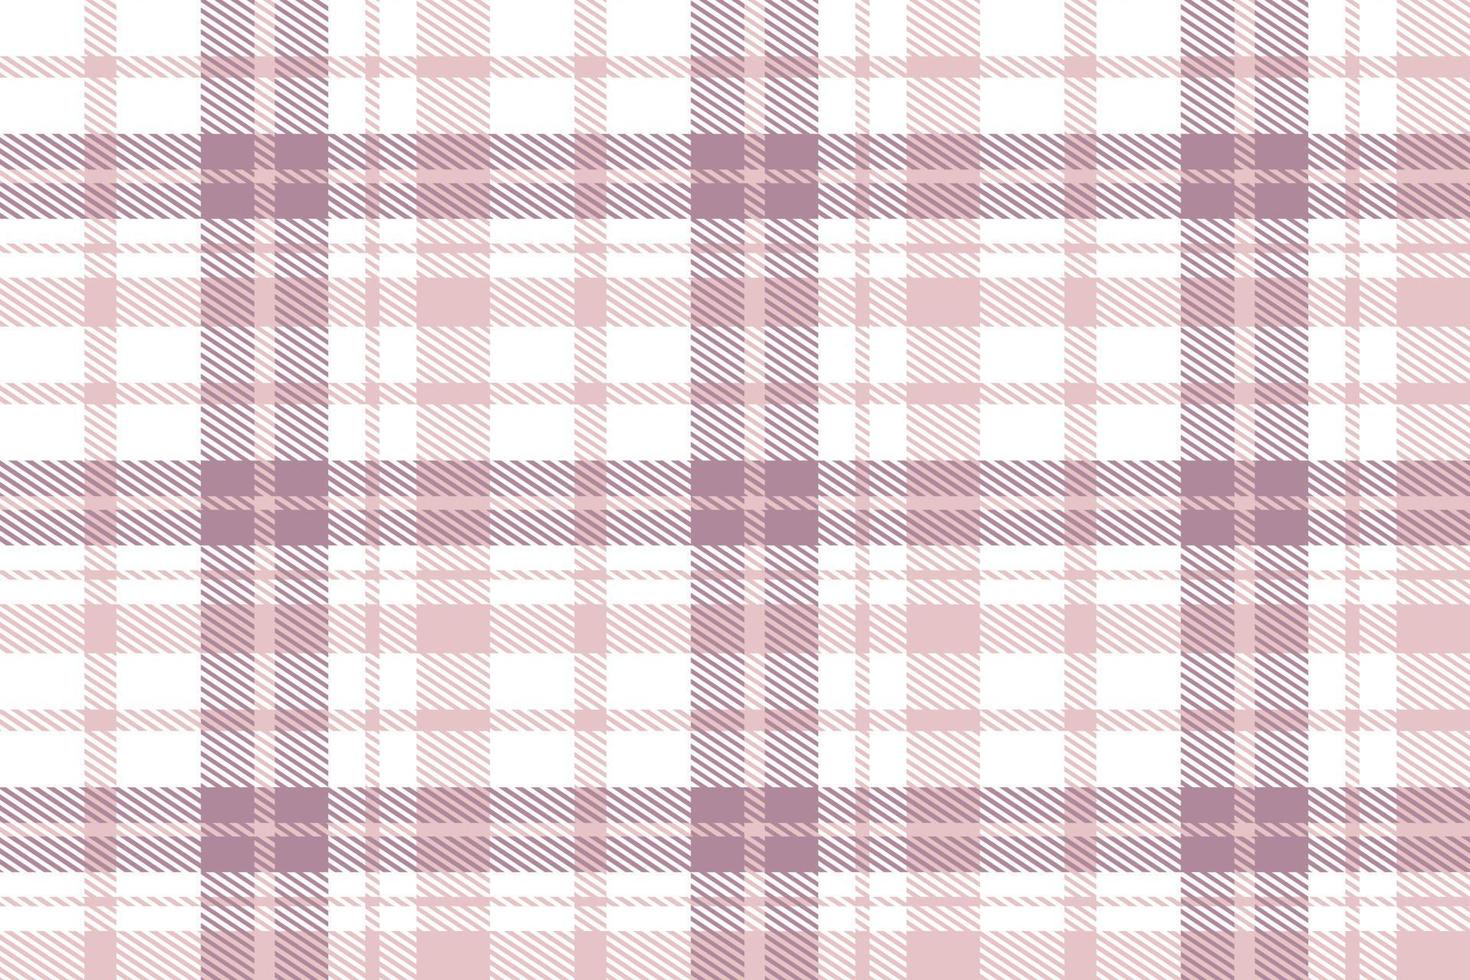 Purple Tartan Plaid Pattern Seamless Texture Is Woven in a Simple Twill, Two Over Two Under the Warp, Advancing One Thread at Each Pass. vector